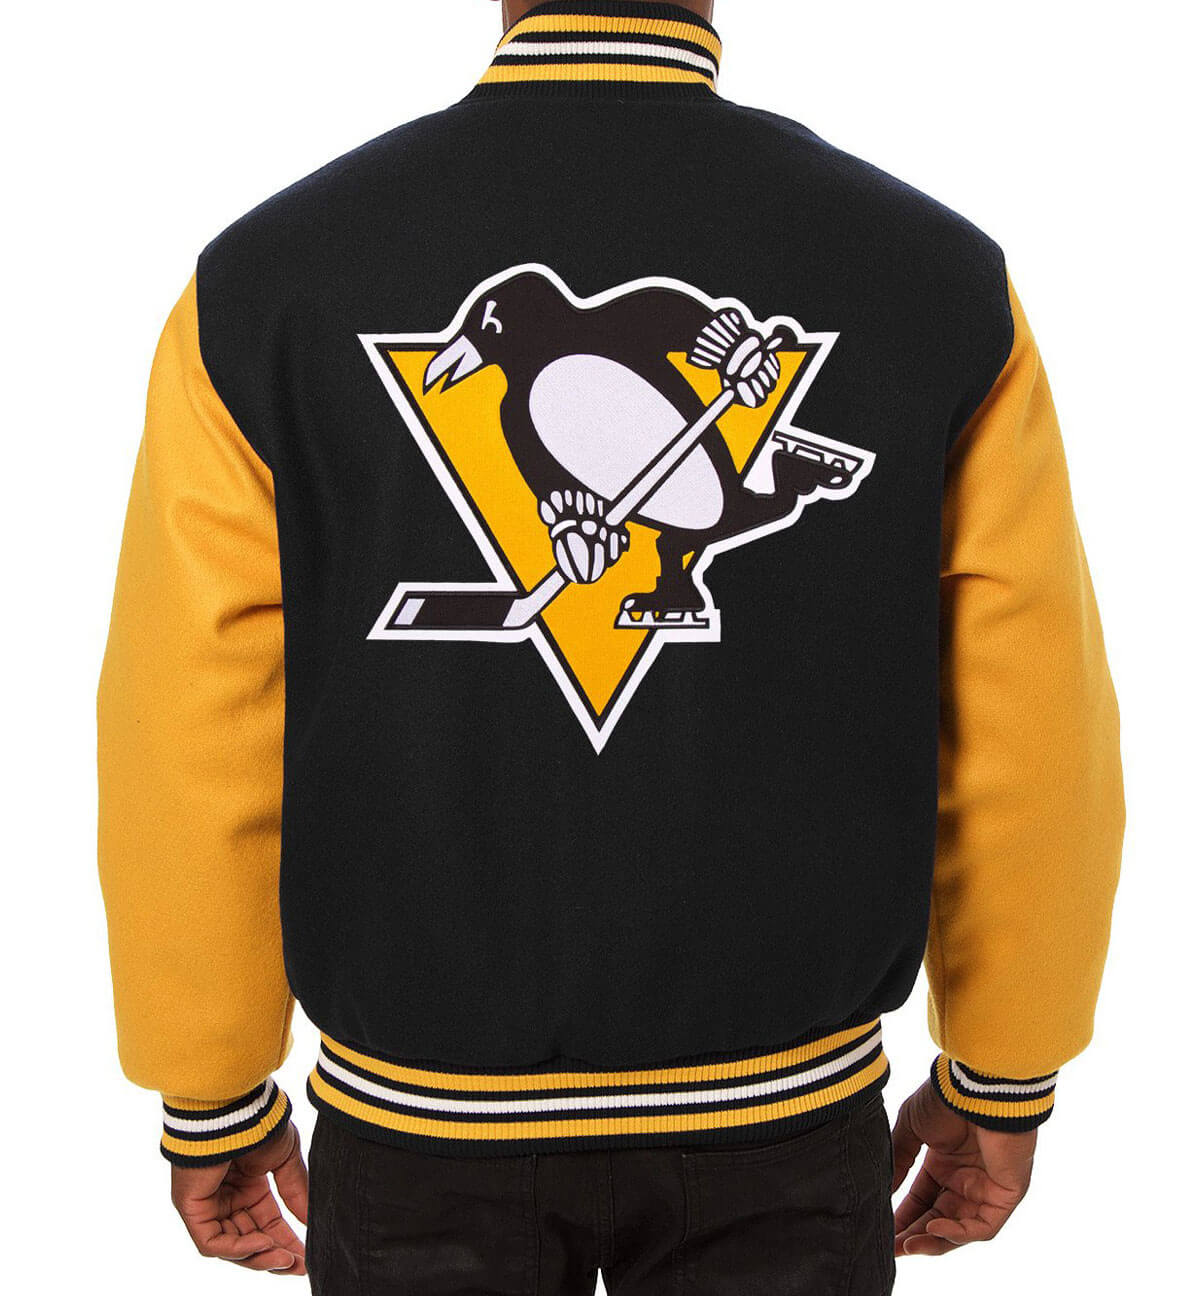 Maker of Jacket Sports Leagues Jackets NHL Pittsburgh Penguins Black and Yellow Varsity